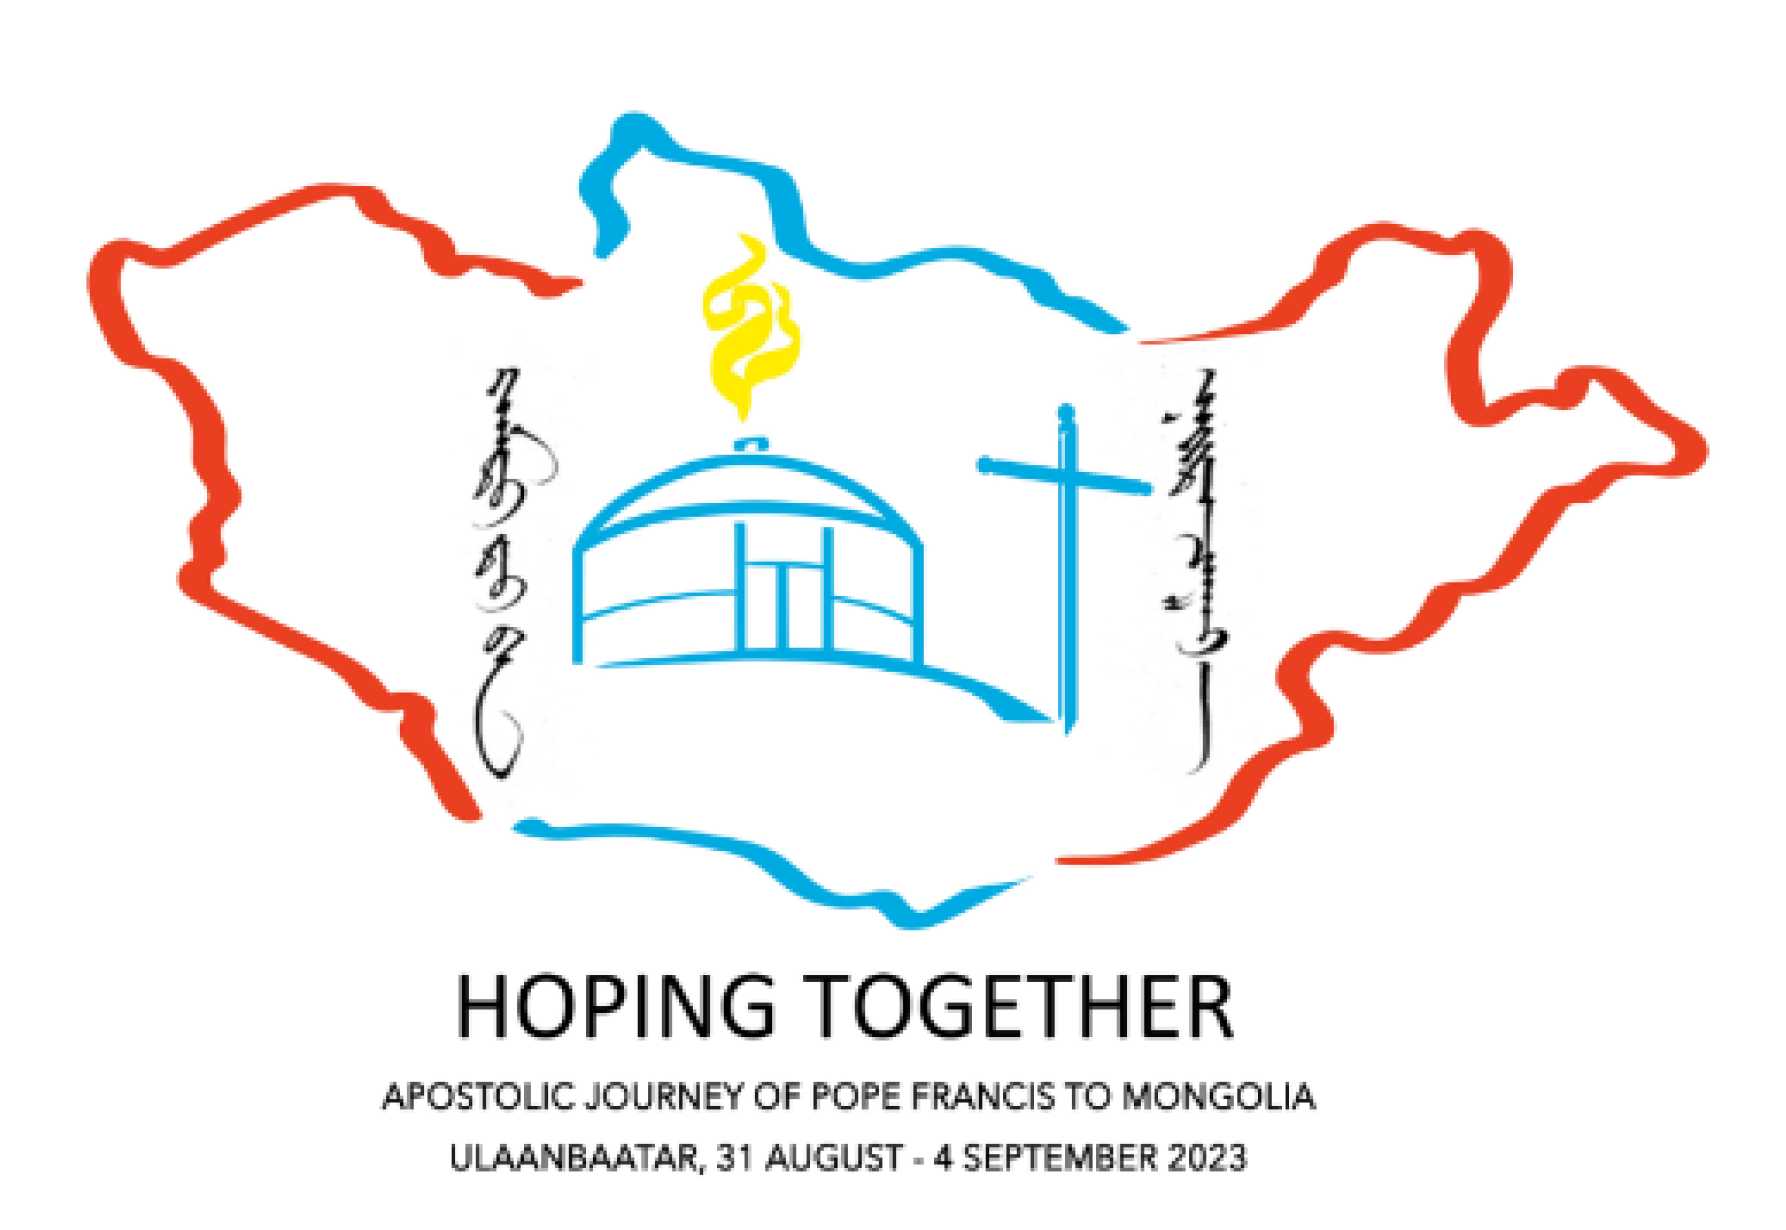 Vatican publishes schedule for papal trip to Mongolia